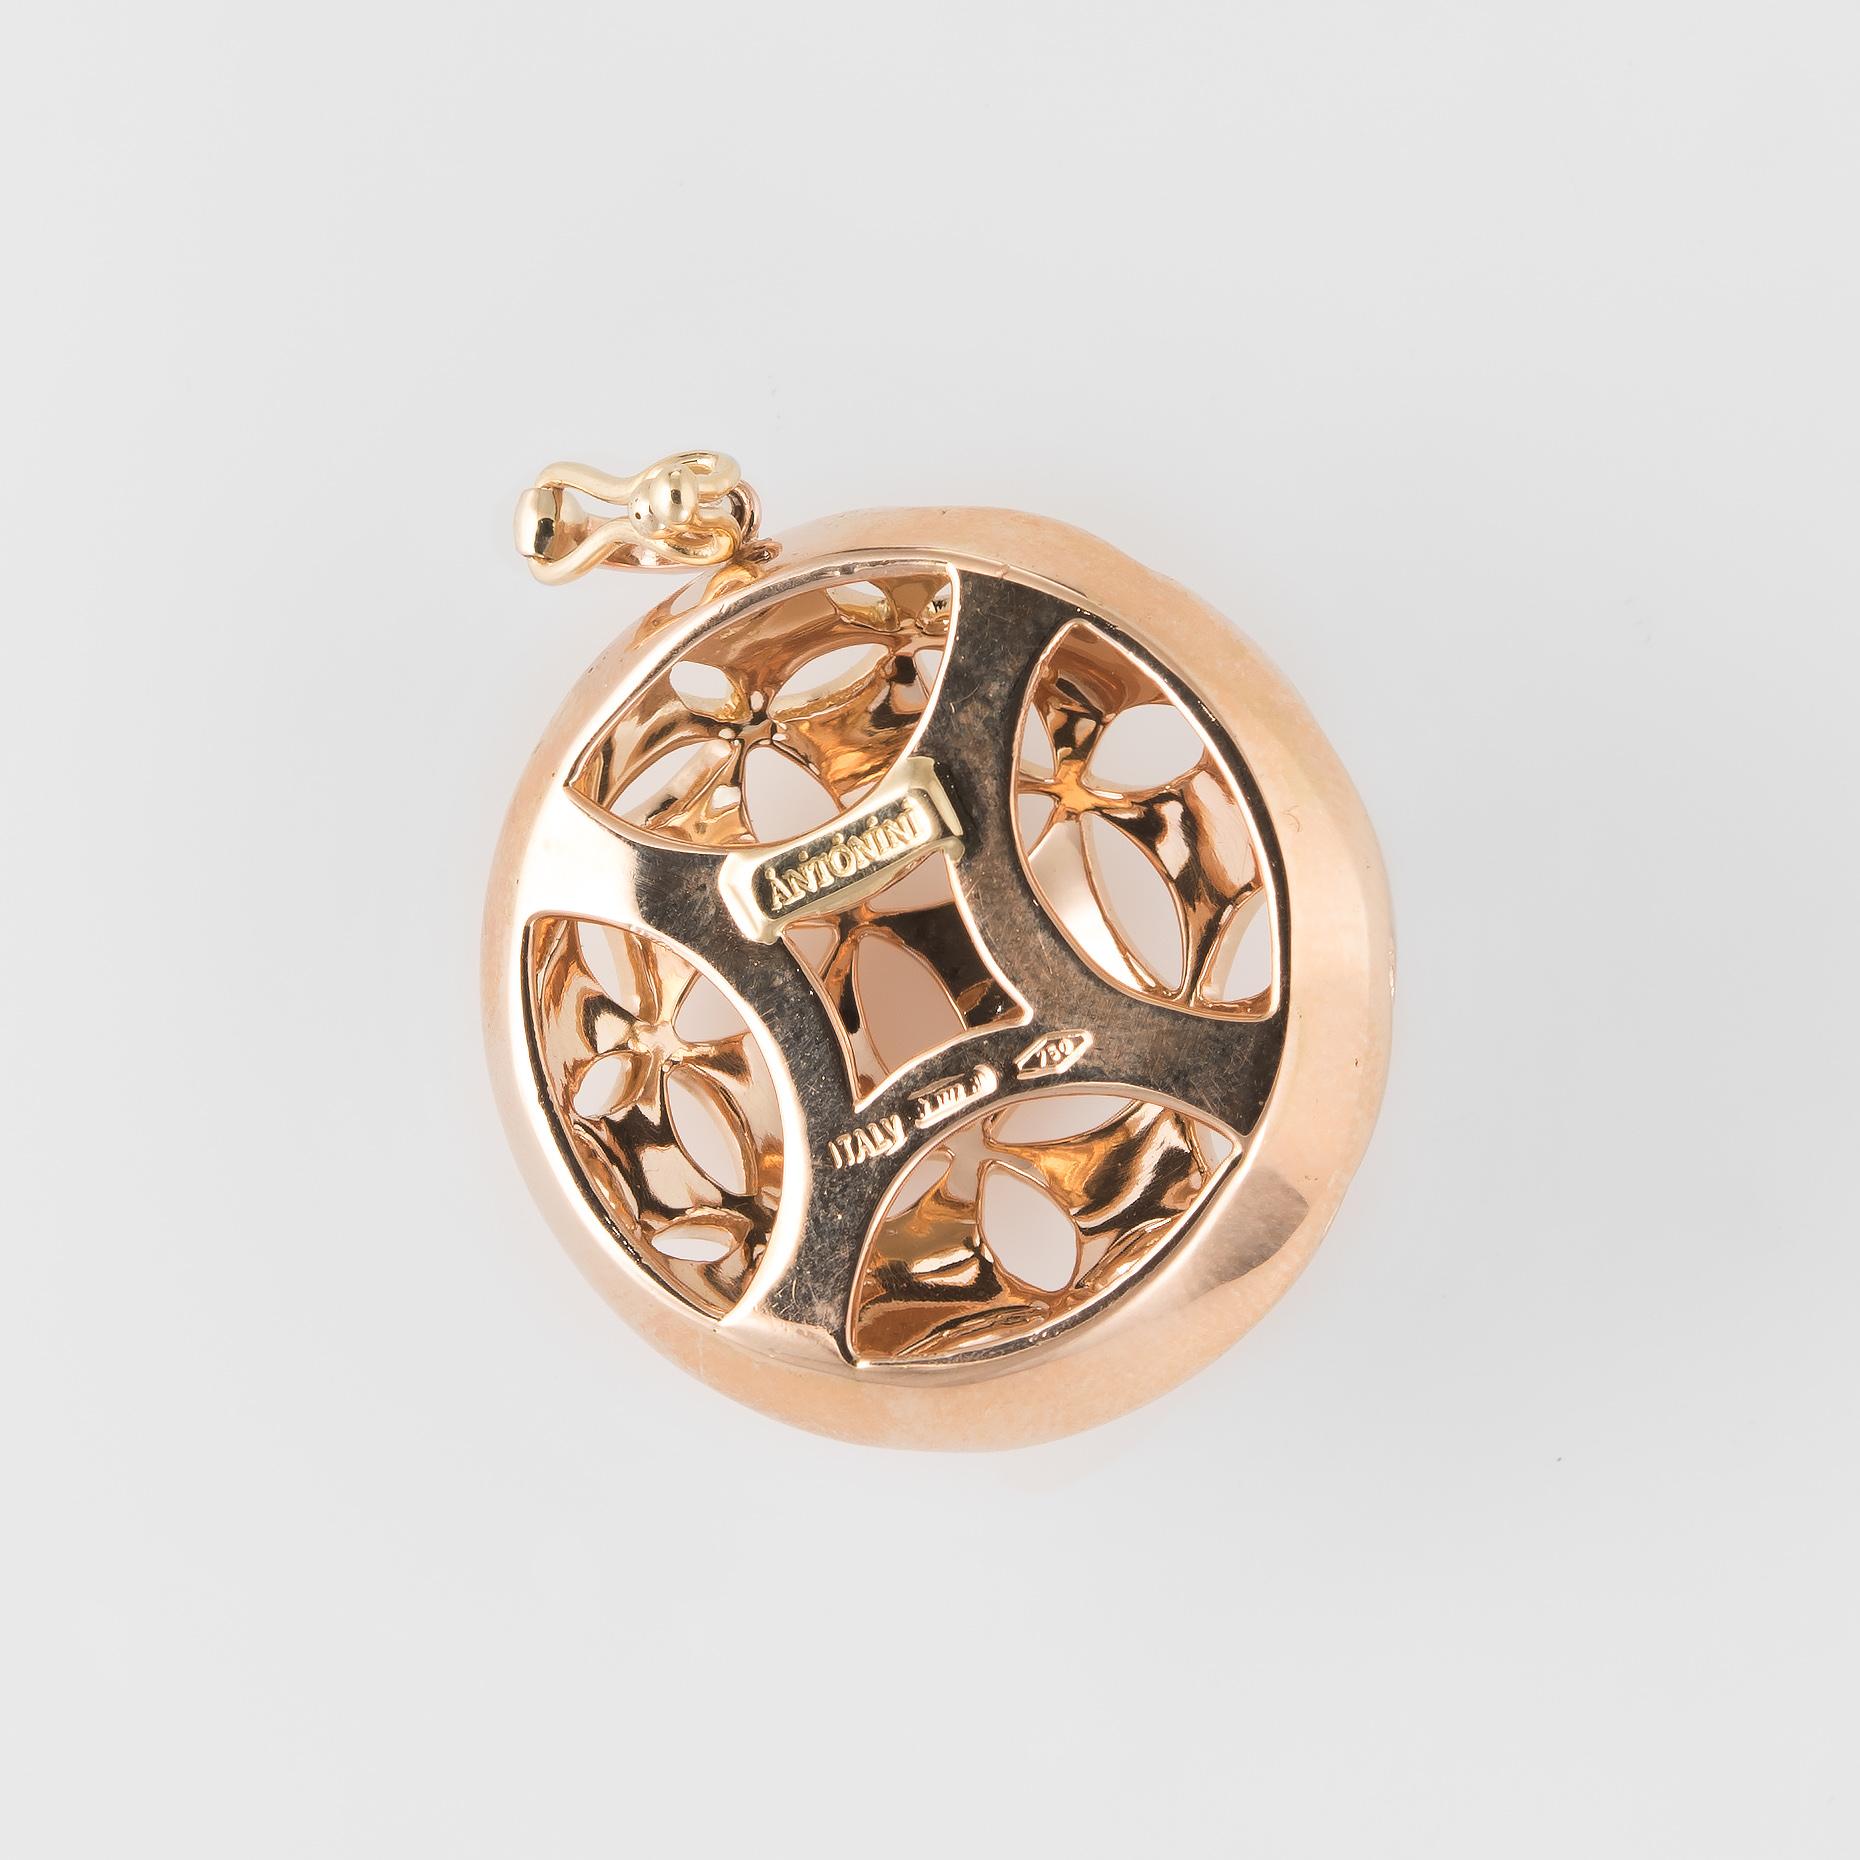 Finely detailed Antonini diamond pendant, crafted in 18 karat rose gold.  

6 diamonds adorn the bale and total an estimated 0.03 carats (estimated at G-H color and VS2 clarity).

Antonini is a famed Italian jeweler known for exotic and distinct